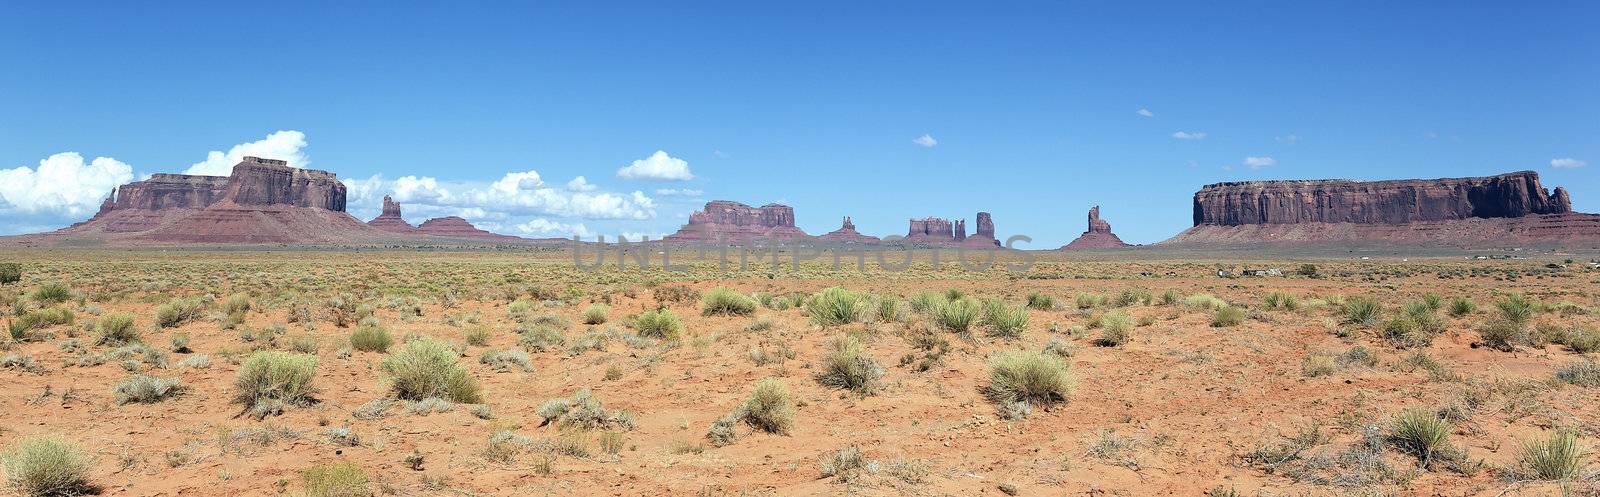 panoramic landscape of Monument Valley, Utah, USA. 